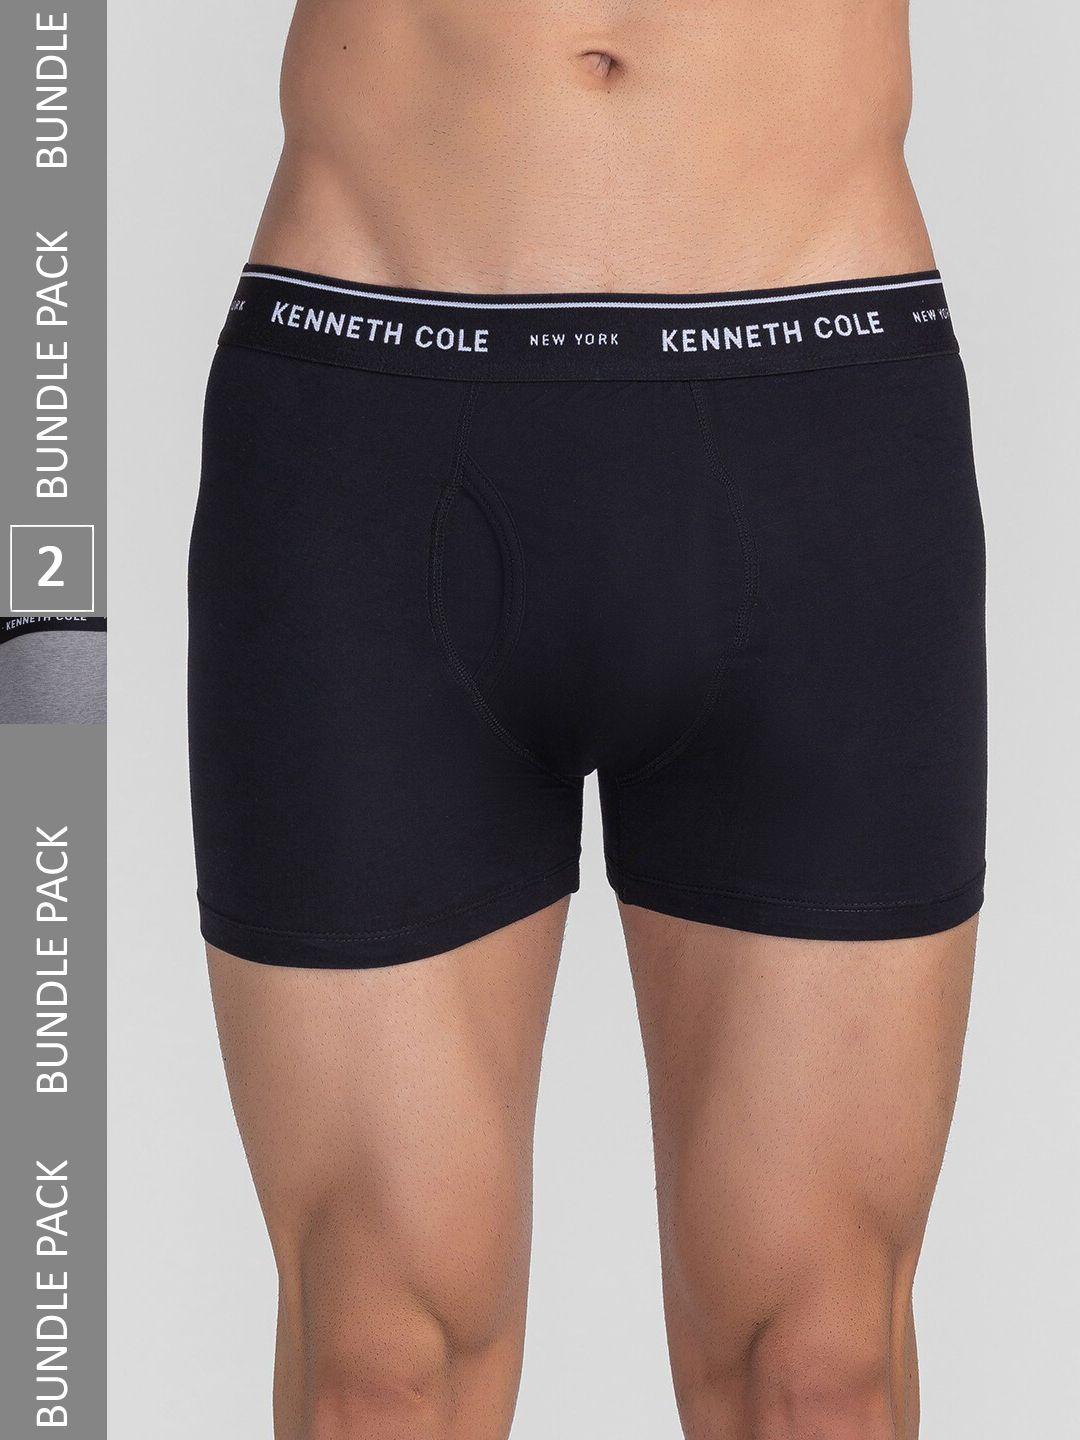 kenneth-cole-men-pack-of-2-brand-logo-printed-waistband-outer-elastic-trunks